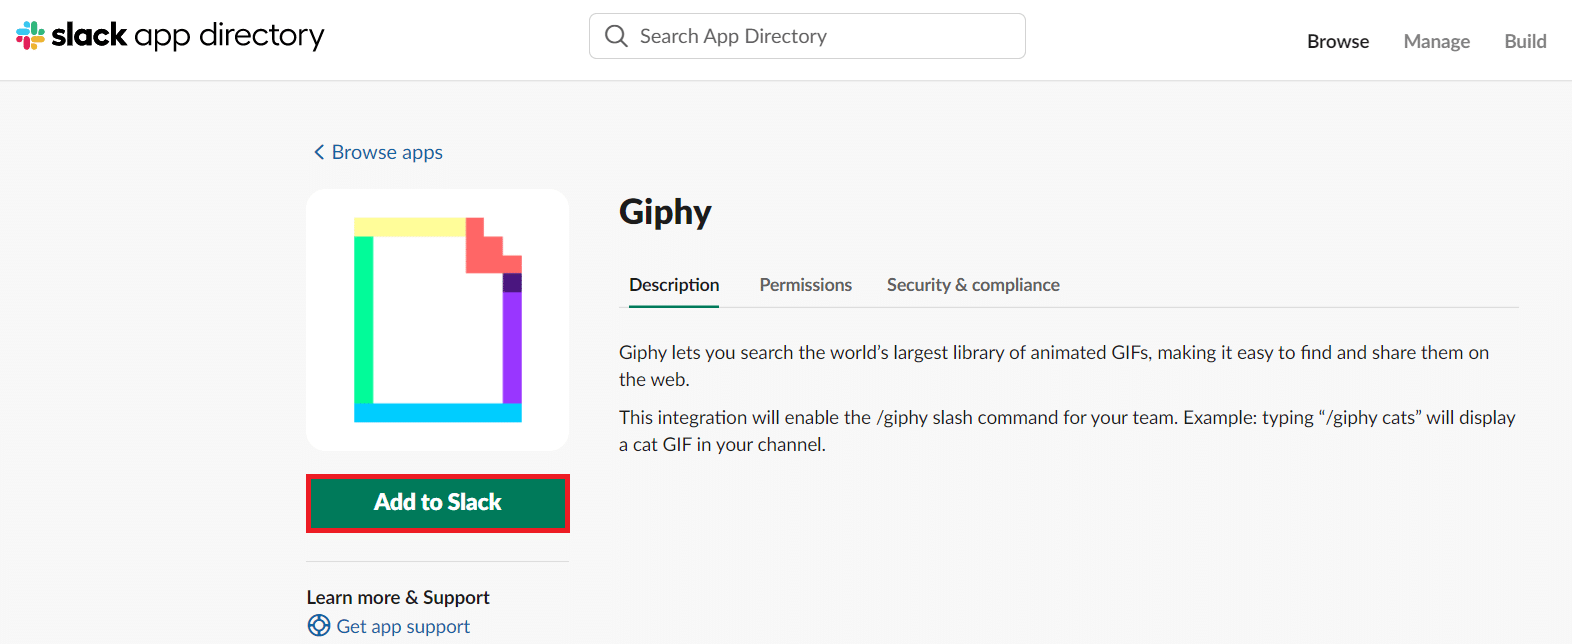 On the new Giphy app page, click Add to Slack